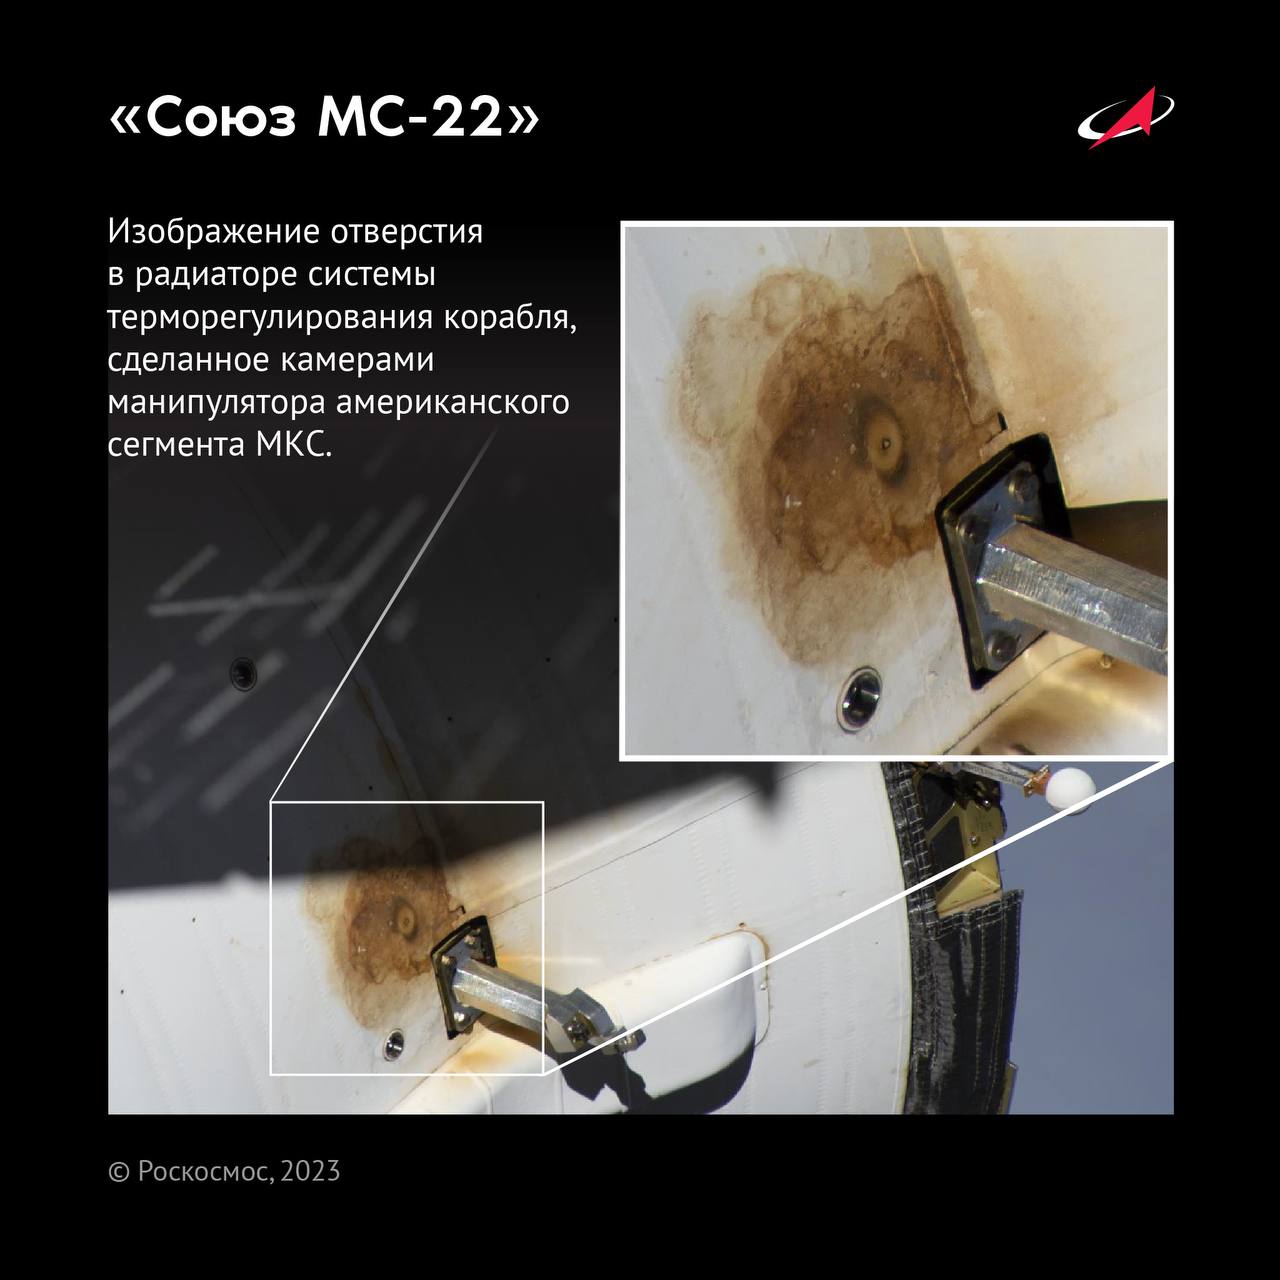 New close-up images showing damage to the MS-22 spacecraft, which Roscosmos claims was caused by a micrometeorite strike. The brown discoloration was caused by the escaping coolant, which poured out from the Soyuz capsule on December 16, 2022.  (Image: Roscosmos)